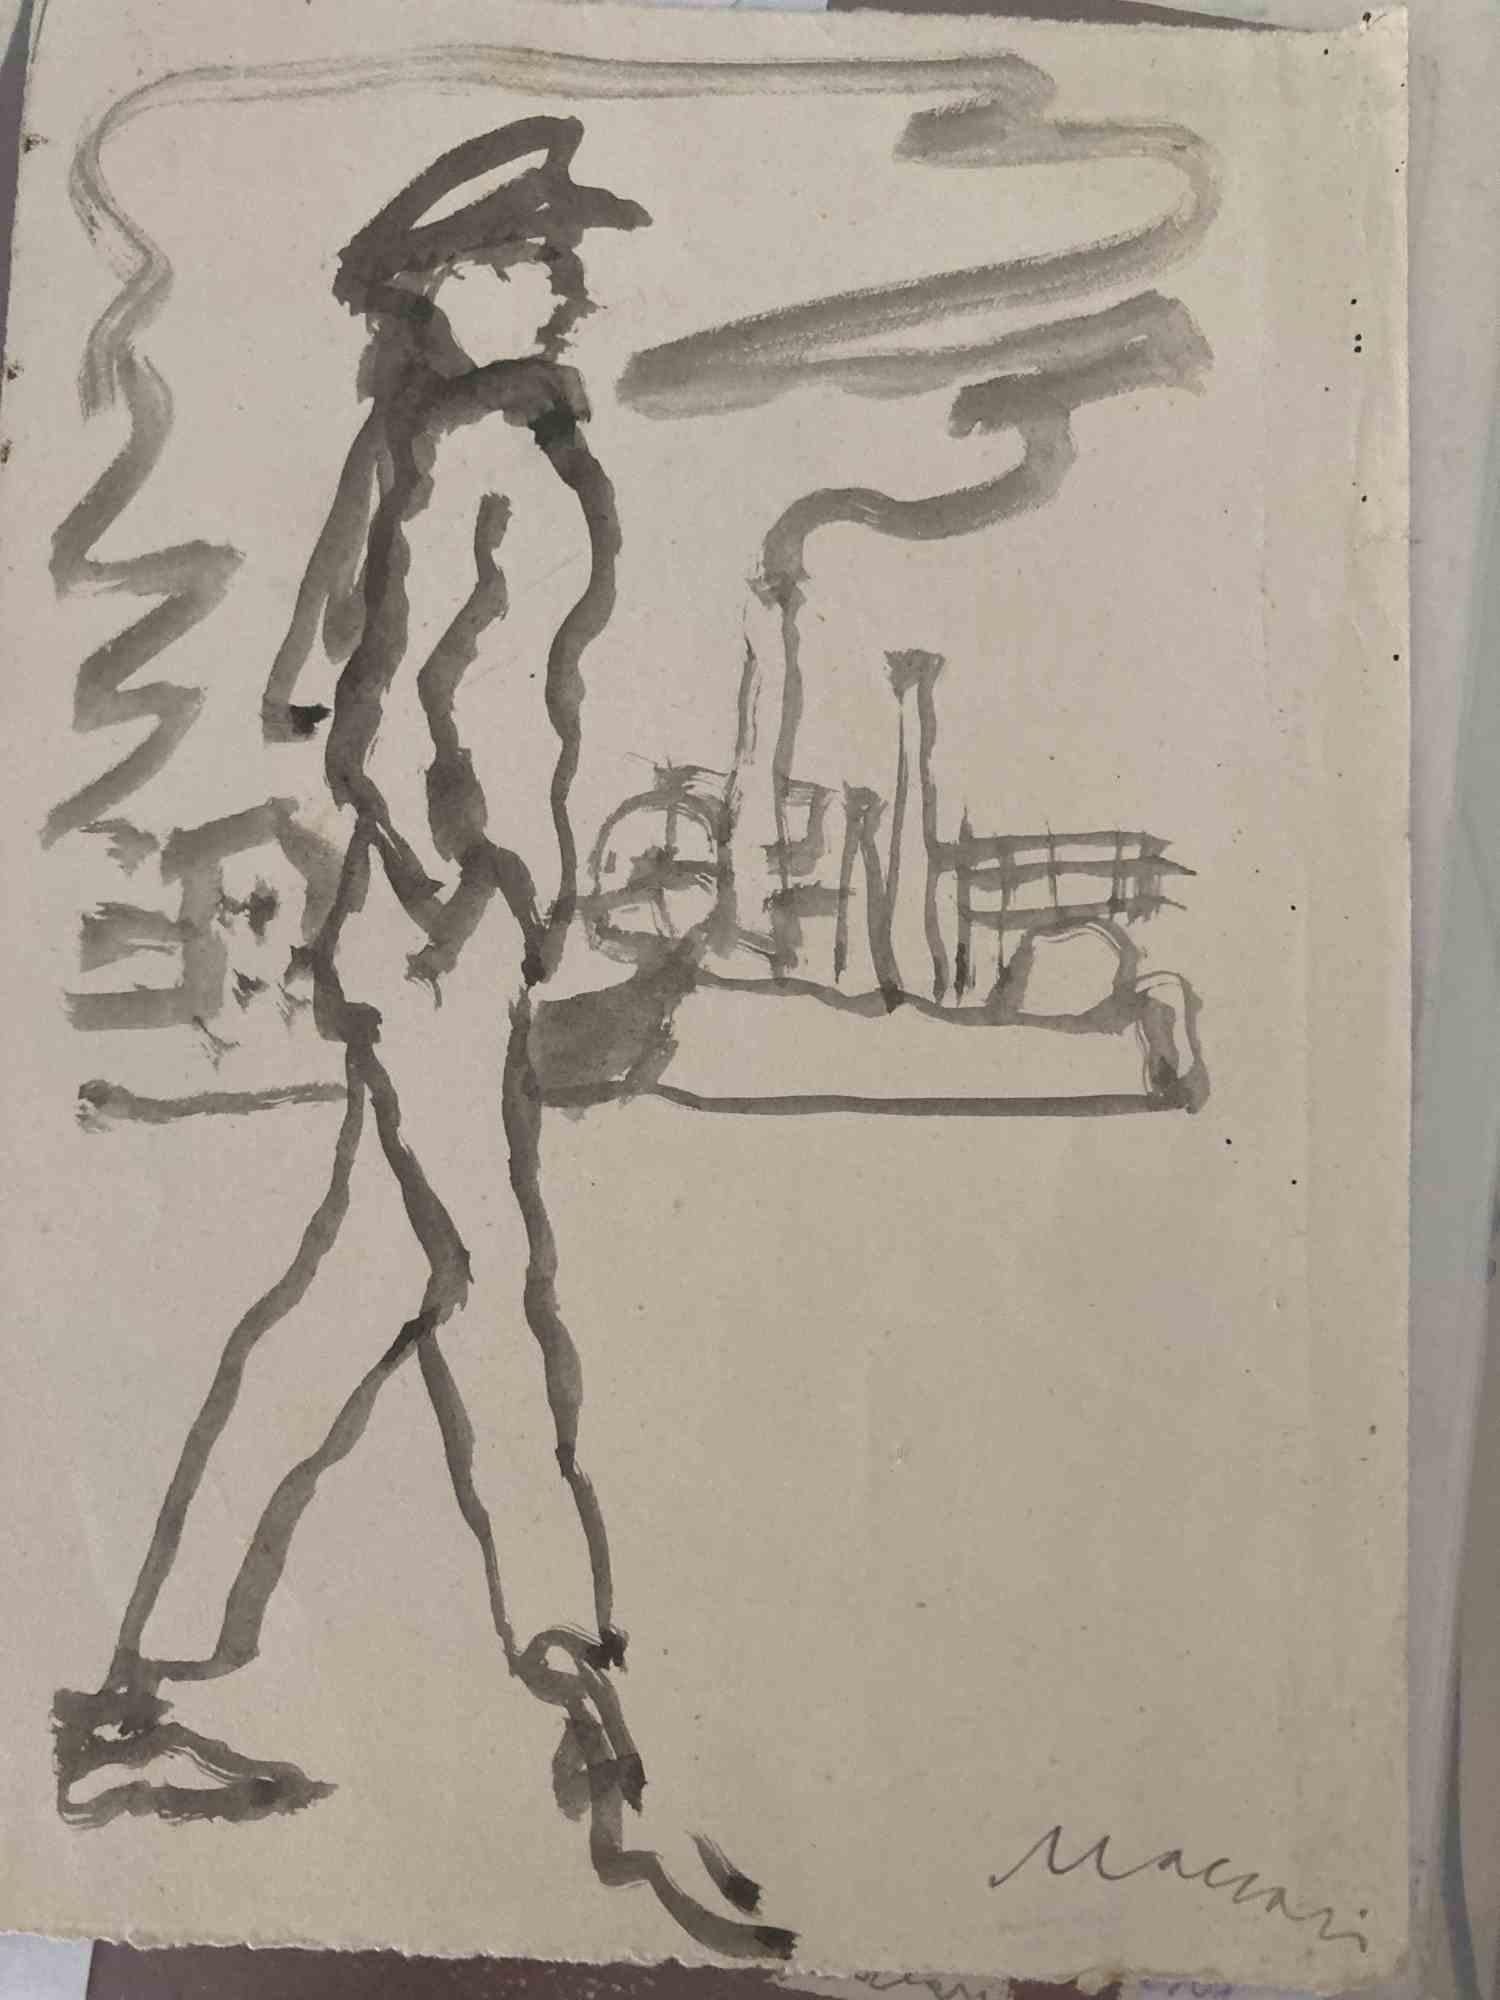 Figure With Industrial Landscape is a Watercolour Drawing realized by Mino Maccari  (1924-1989) in 1960s.

Hand signed on the lower margin.

Good condition on a little paper.

Mino Maccari (Siena, 1924-Rome, June 16, 1989) was an Italian writer,